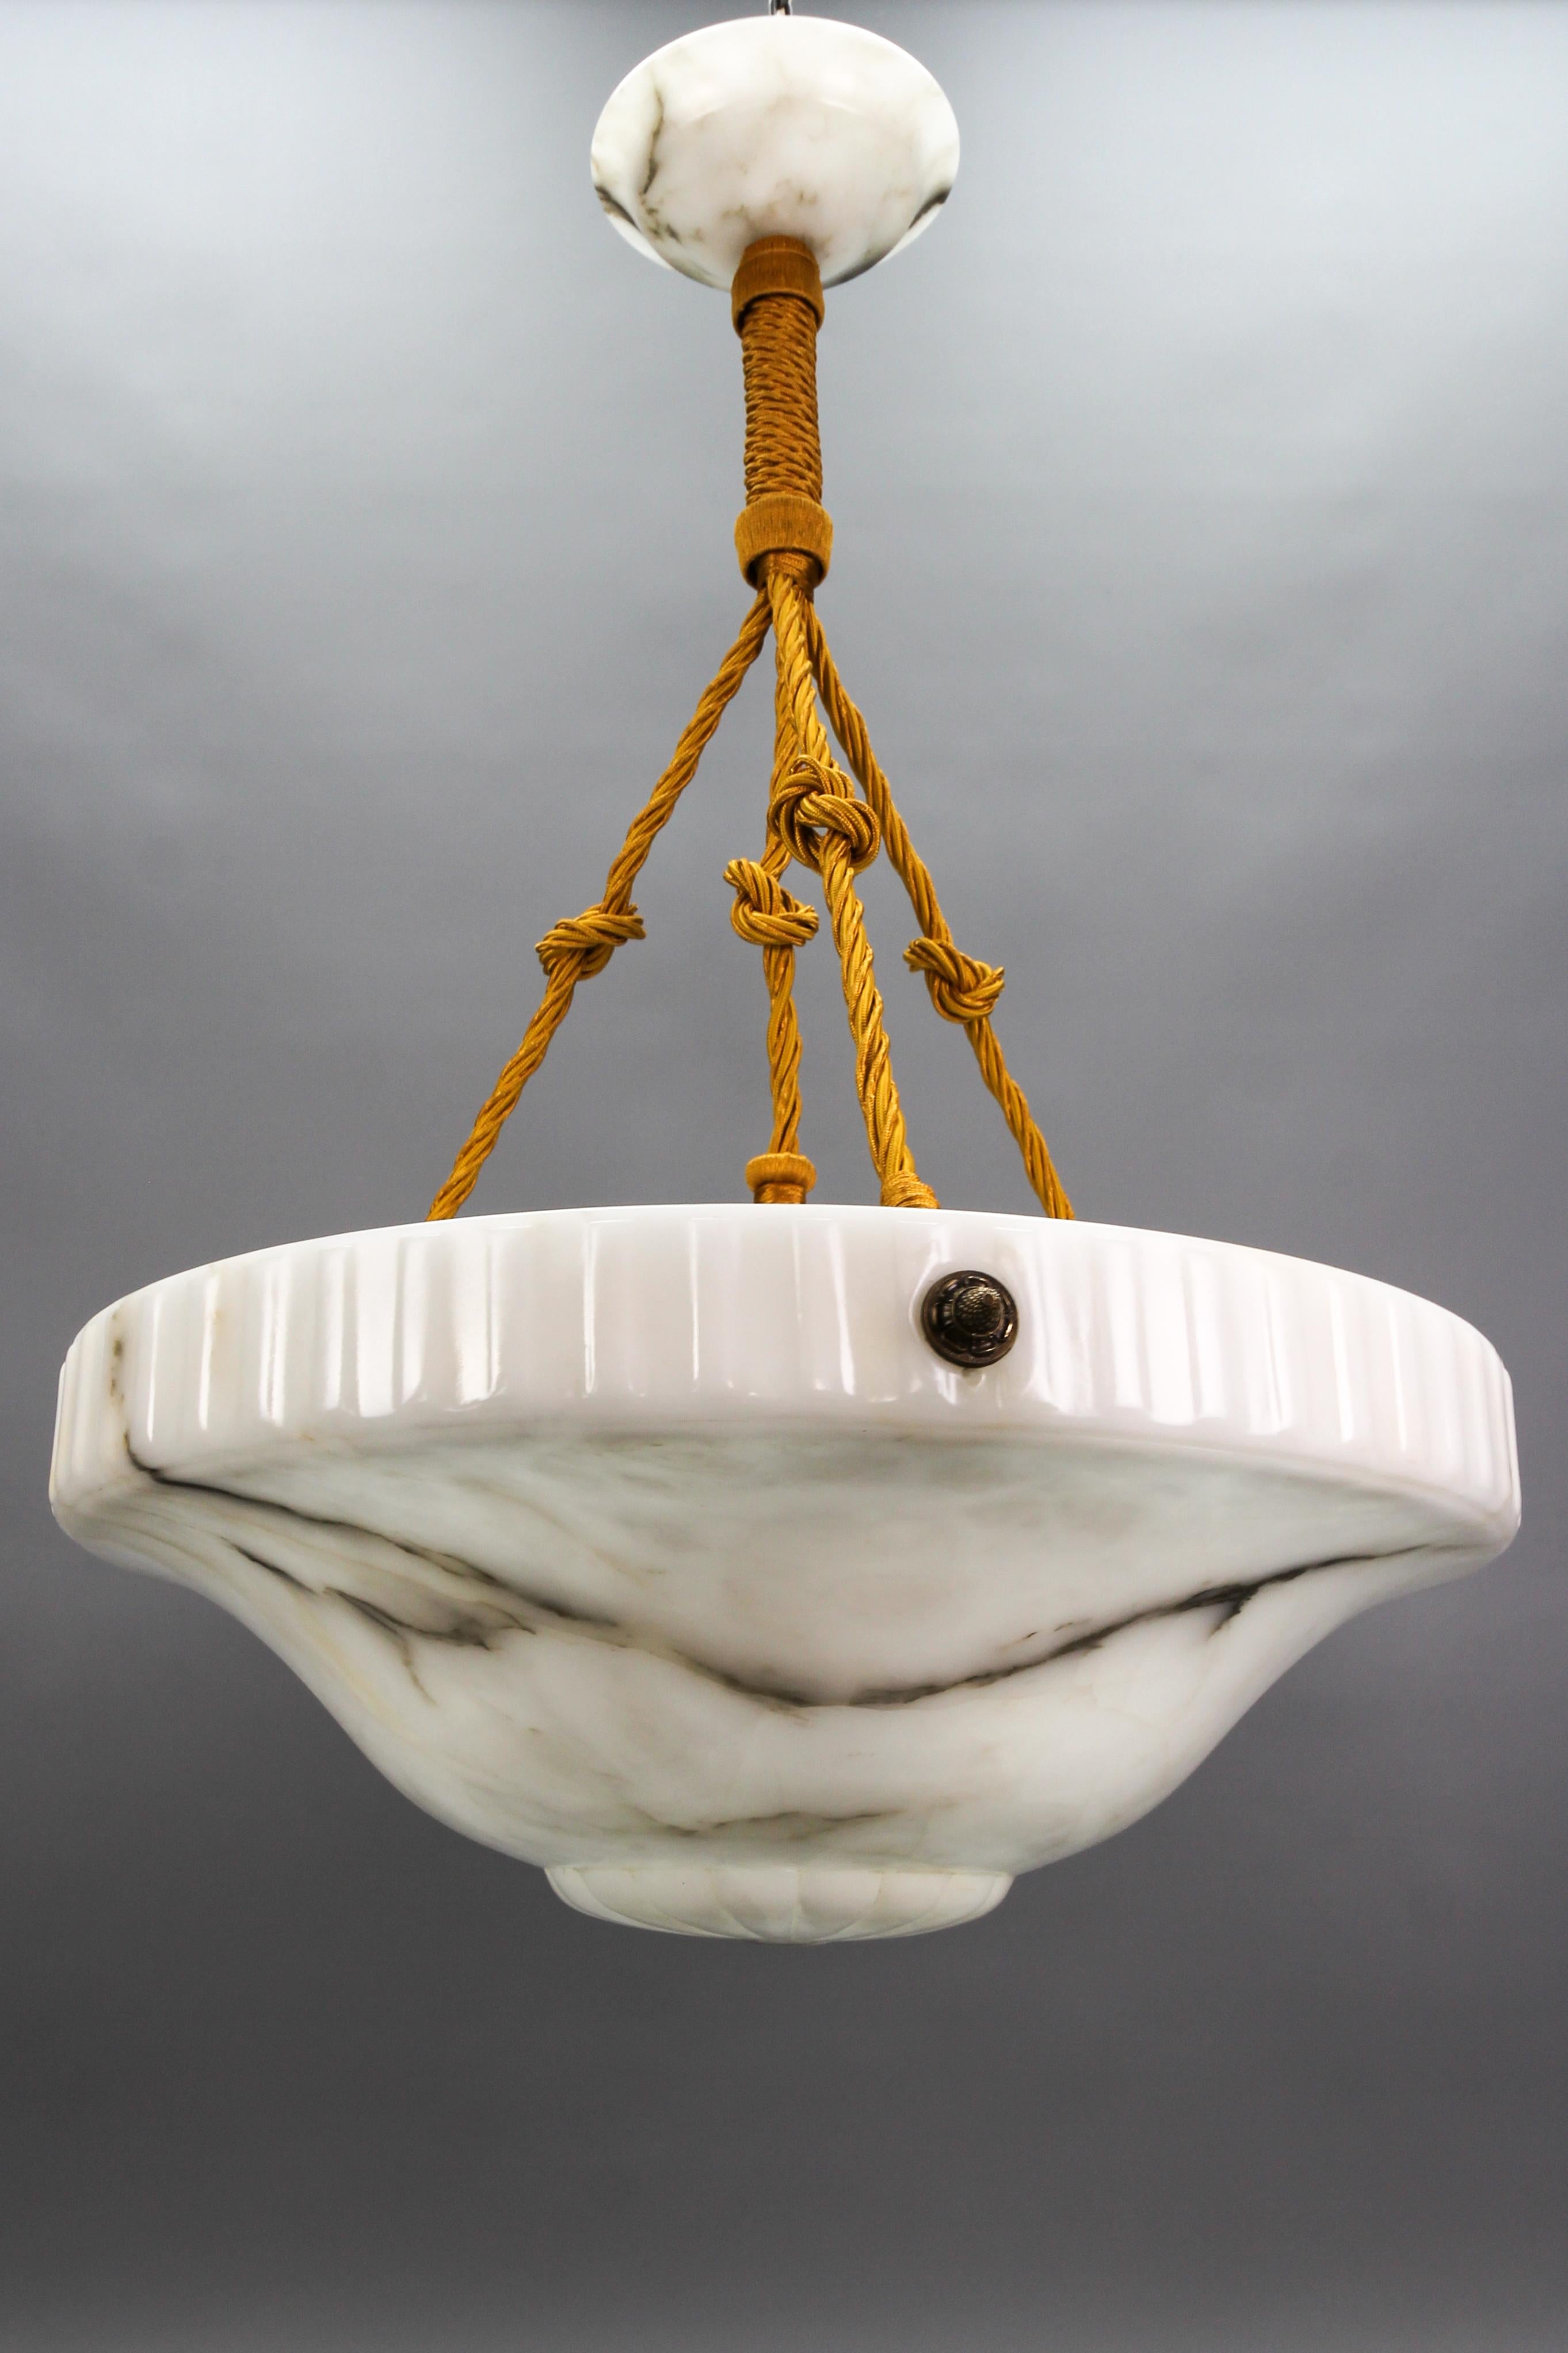 Large Art Deco white alabaster four-light pendant chandelier, Italy, circa the 1930s.
An impressive and beautifully shaped alabaster pendant light fixture from circa the 1930s. The large white alabaster bowl is suspended by ropes - wires with brass